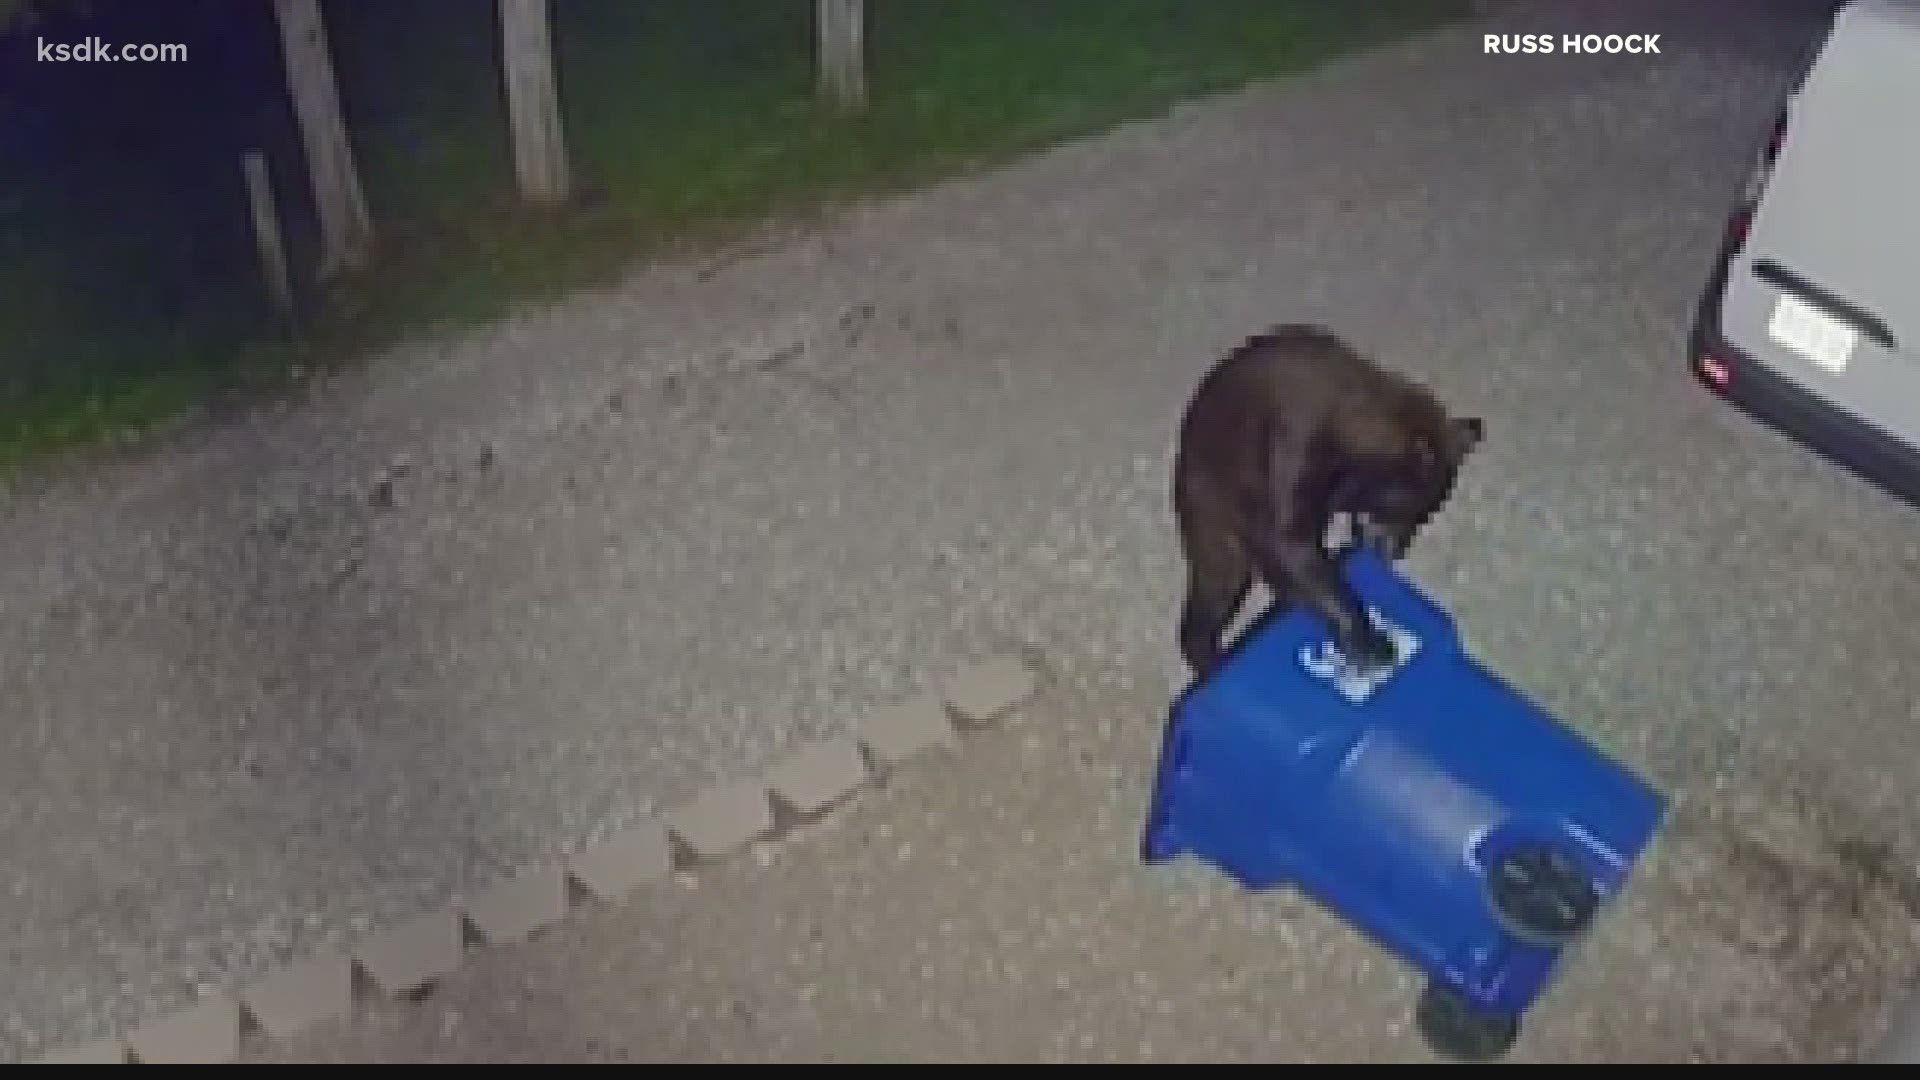 A family's Ring security video caught the bear tipping over a trashcan and snagging a bag of chips before running off into the woods